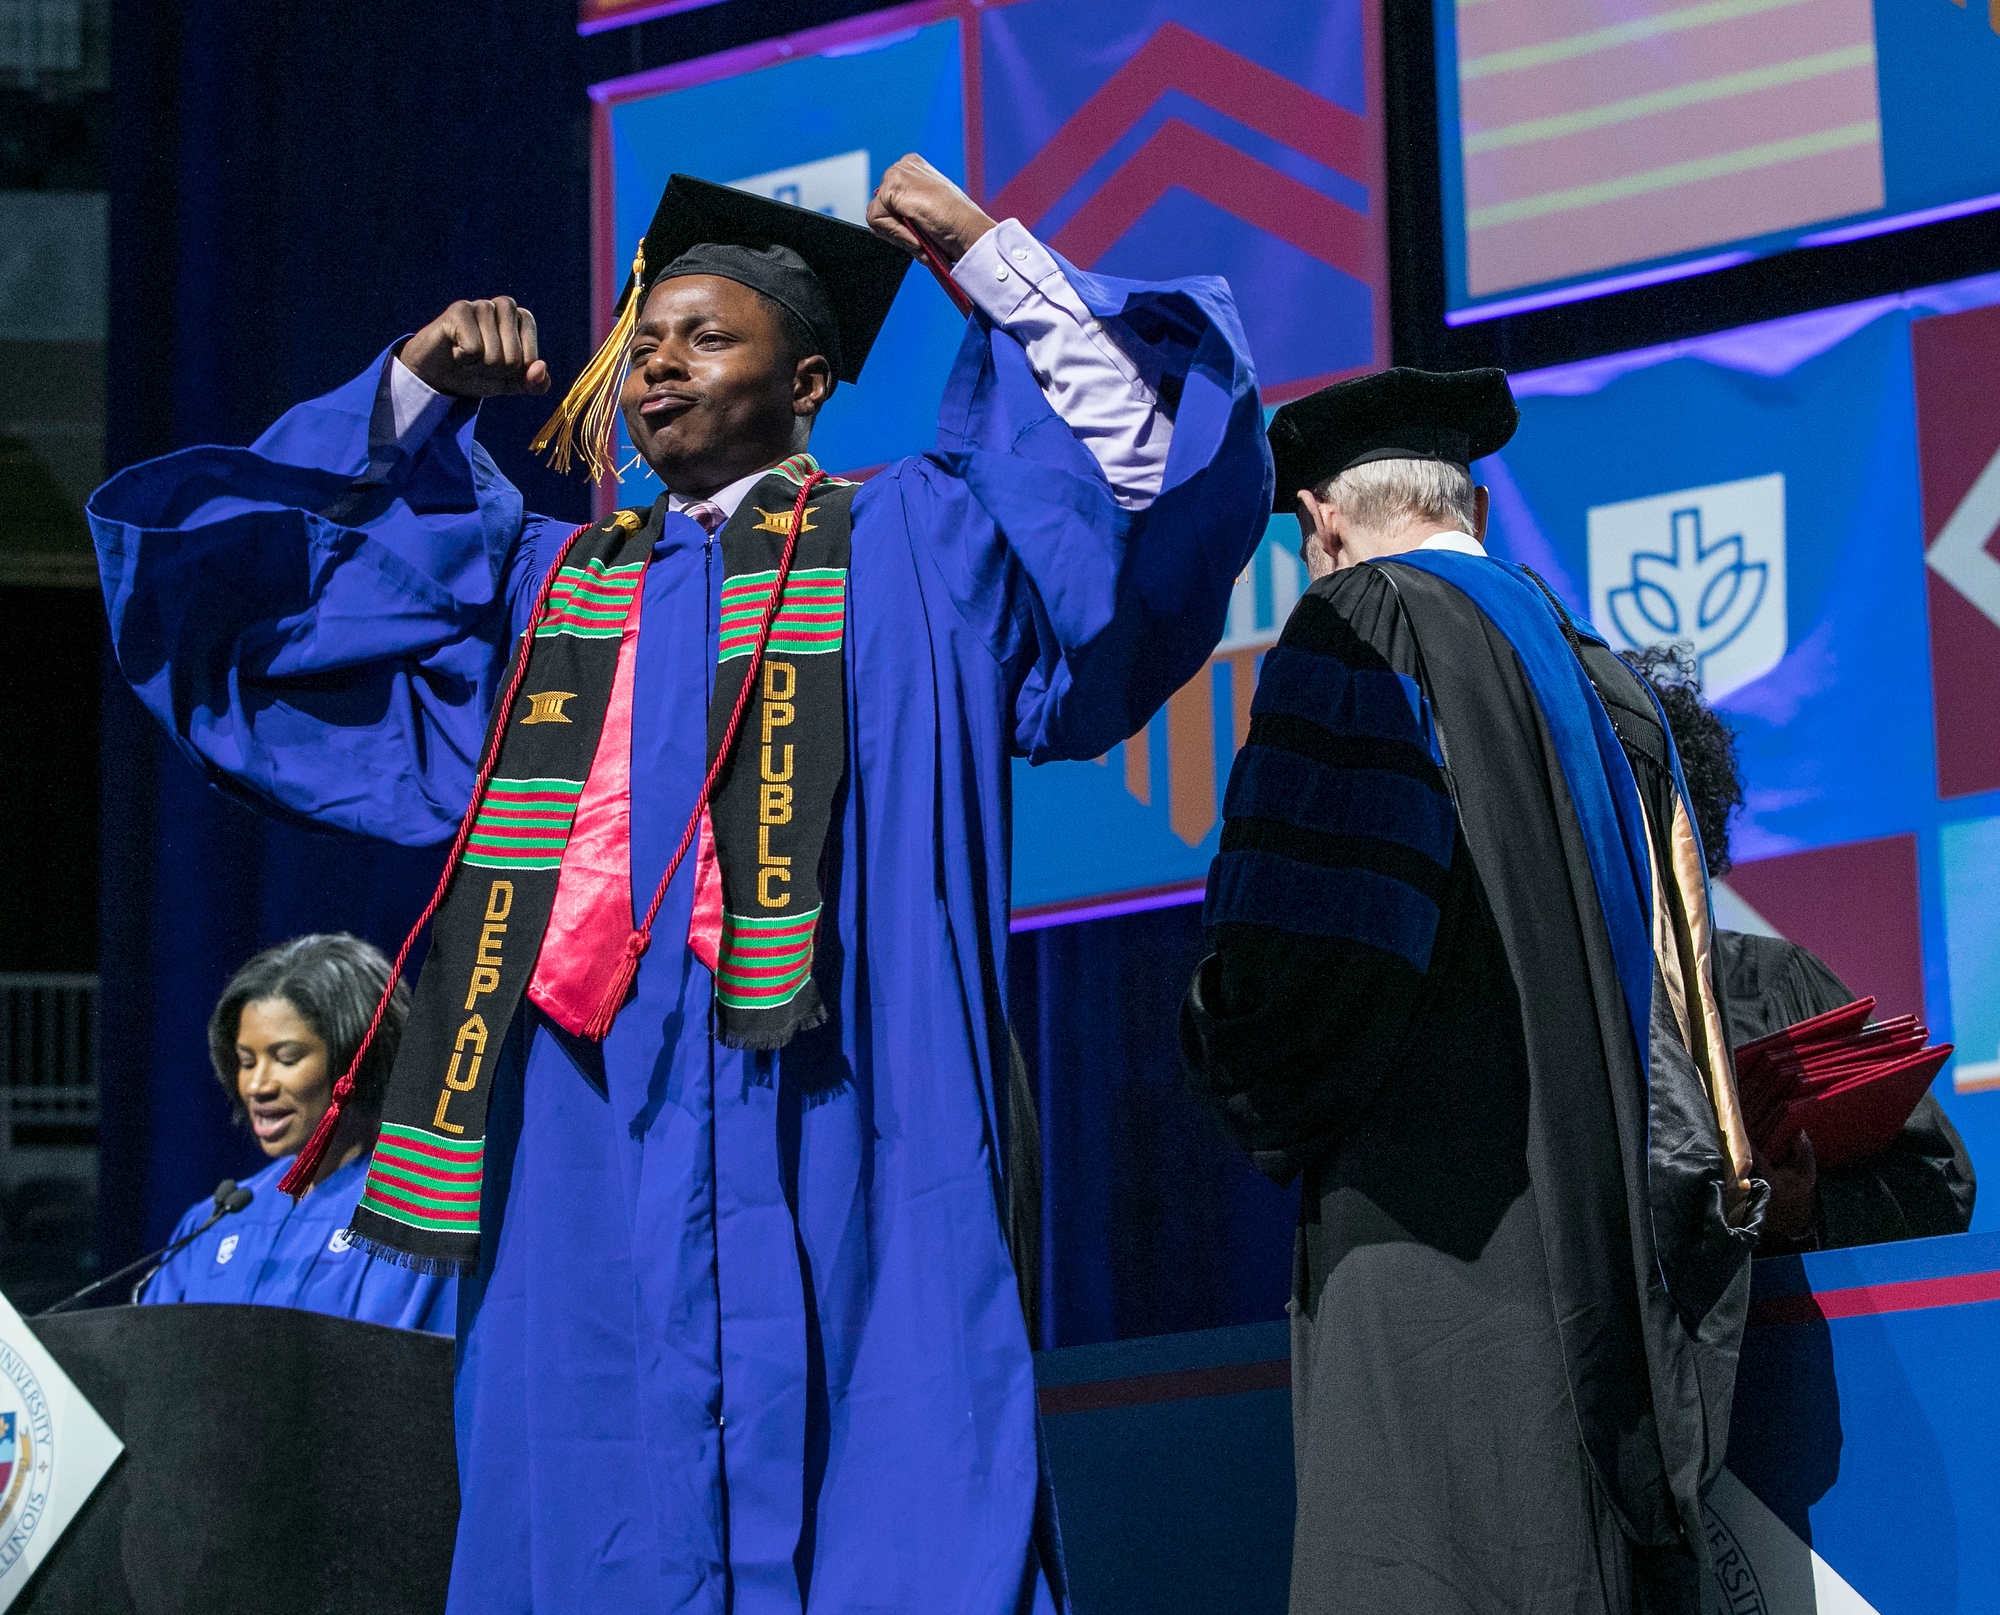 Graduates pose as they receive their diplomas during the commencement ceremony for the Driehaus College of Business at Wintrust Arena in Chicago. (DePaul University/Jamie Moncrief)